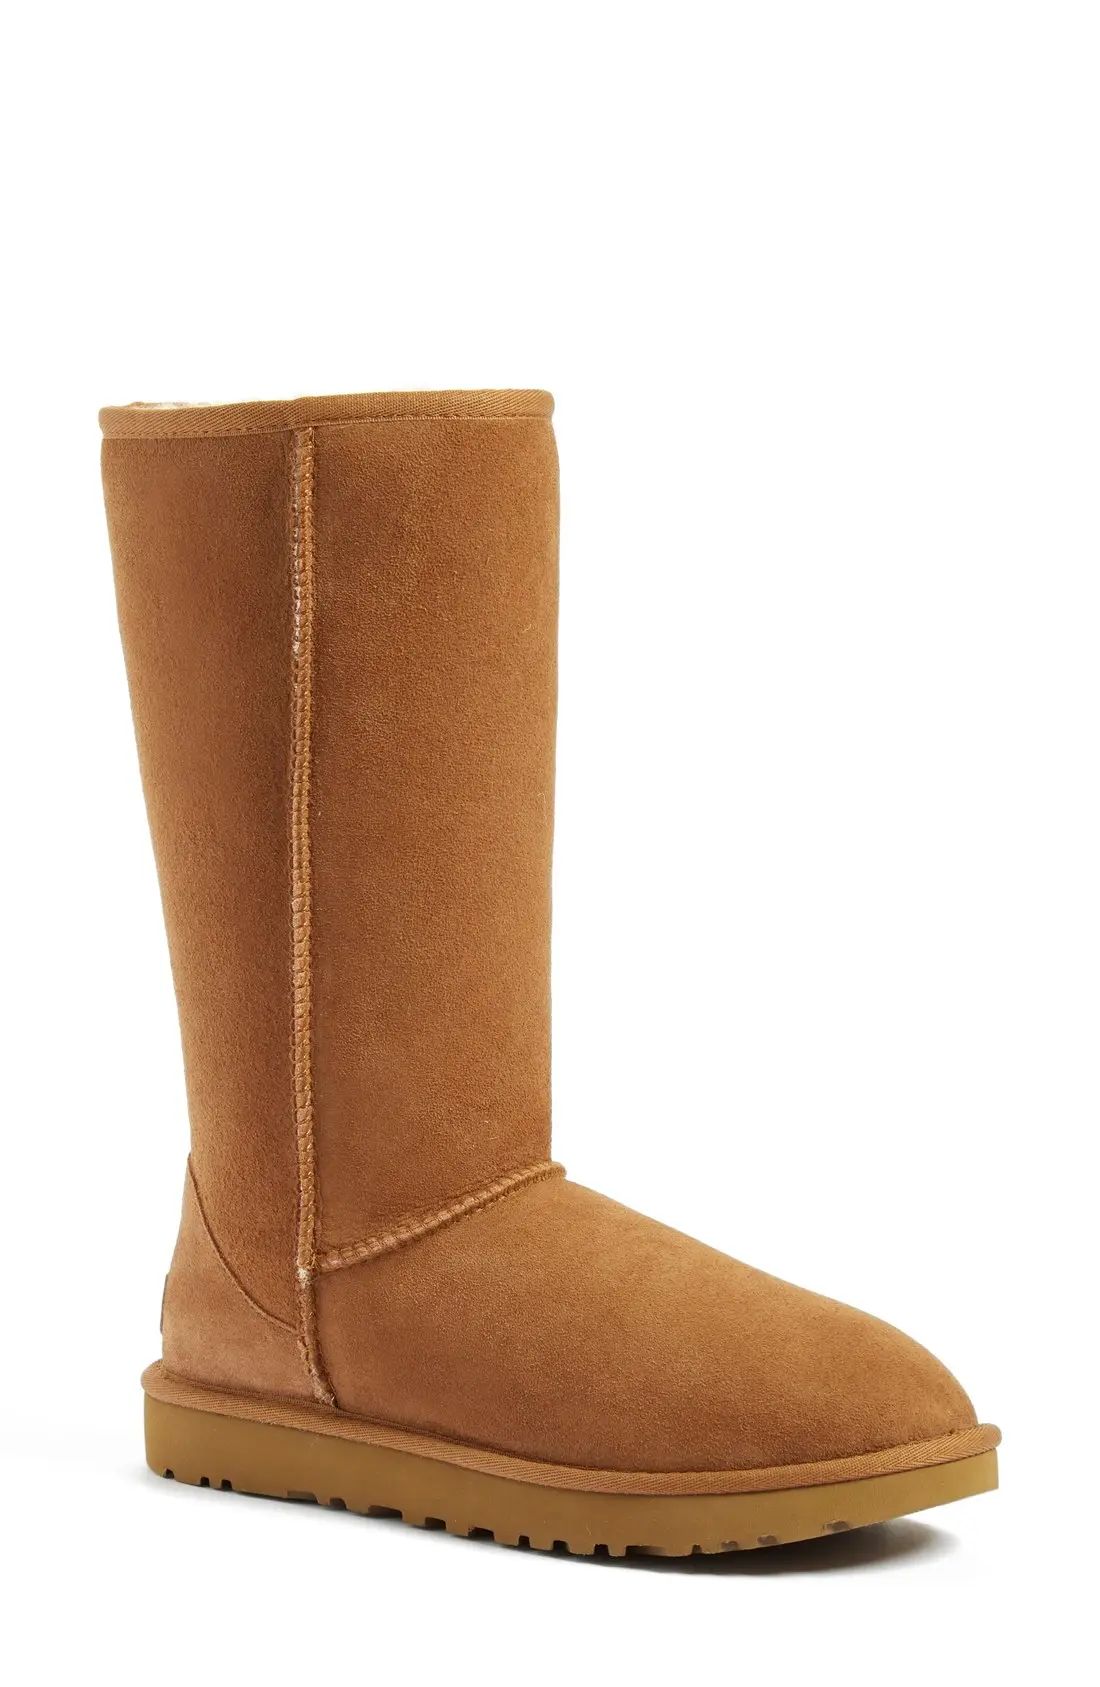 Women's Ugg Classic Ii Genuine Shearling Lined Tall Boot, Size 5 M - Brown | Nordstrom